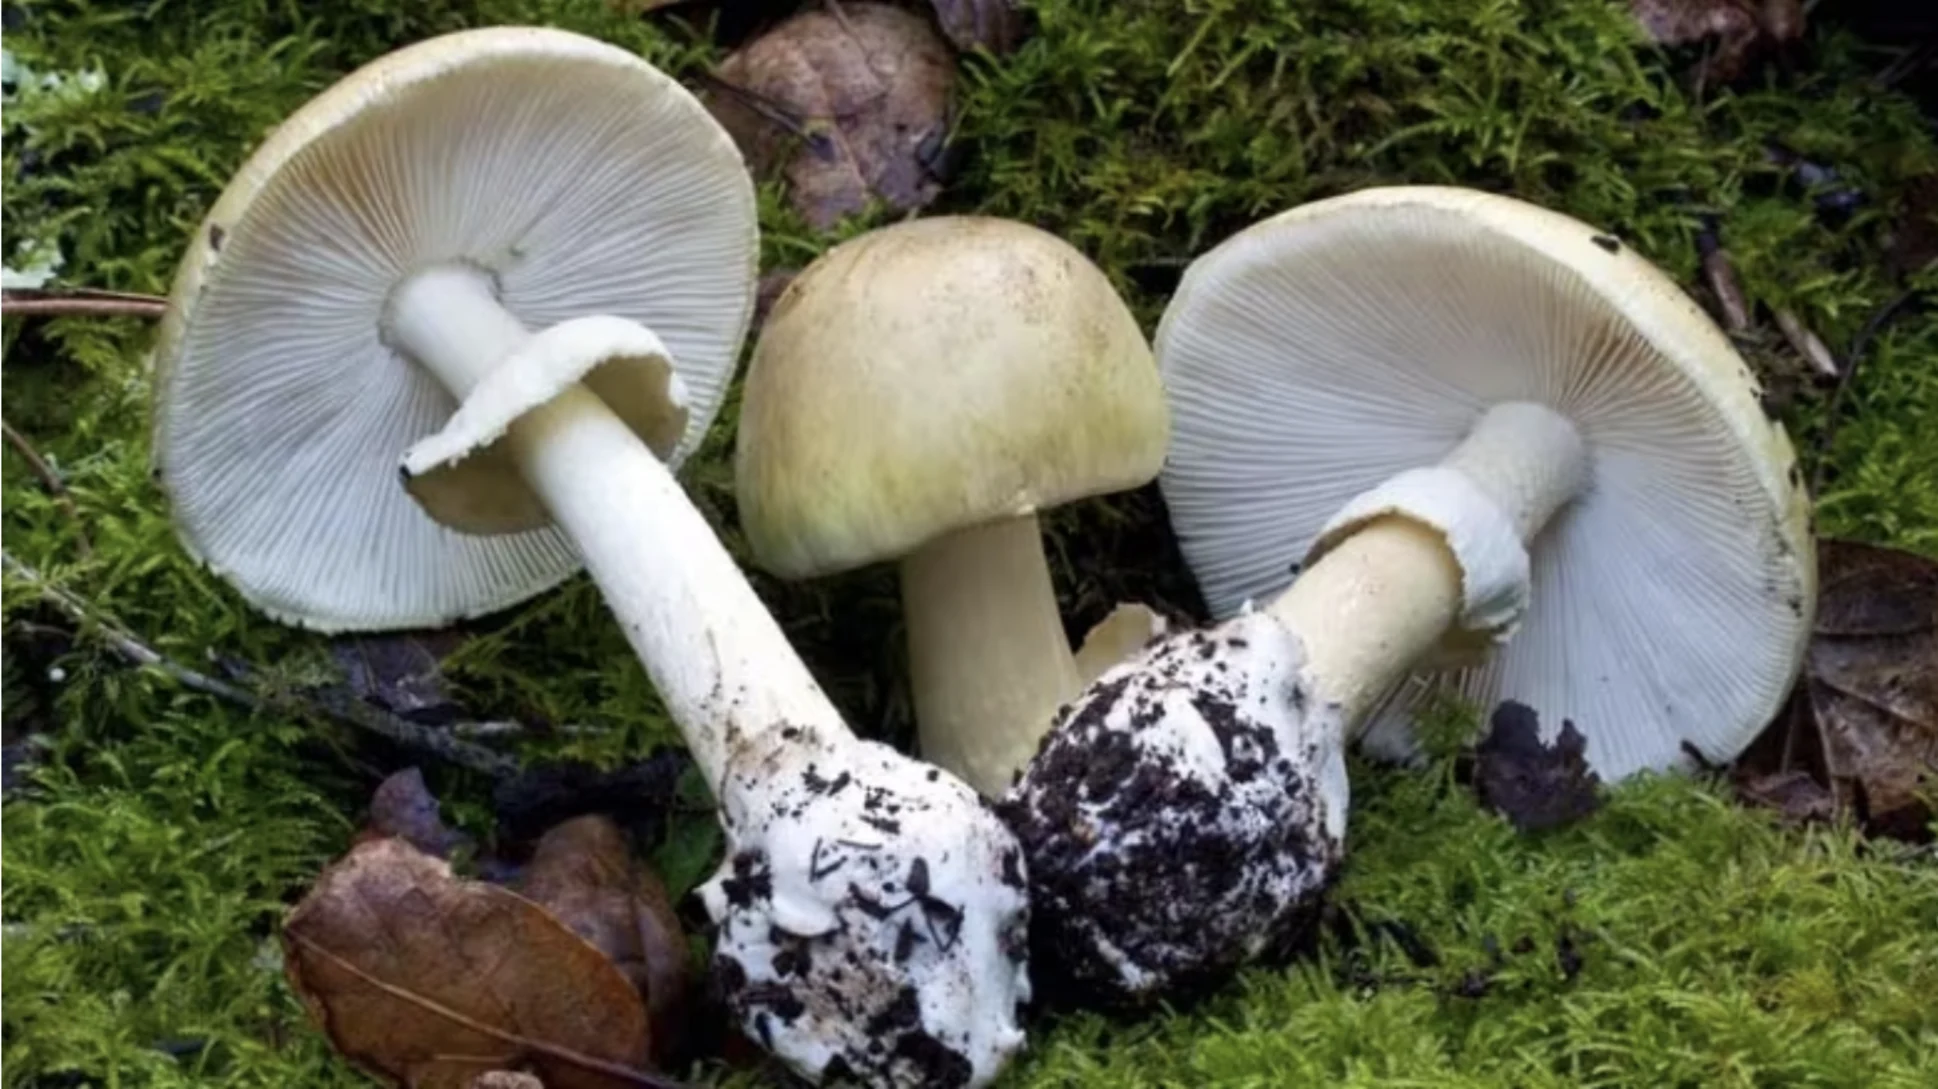 Be warned: watch out for poisonous death cap mushrooms in B.C.